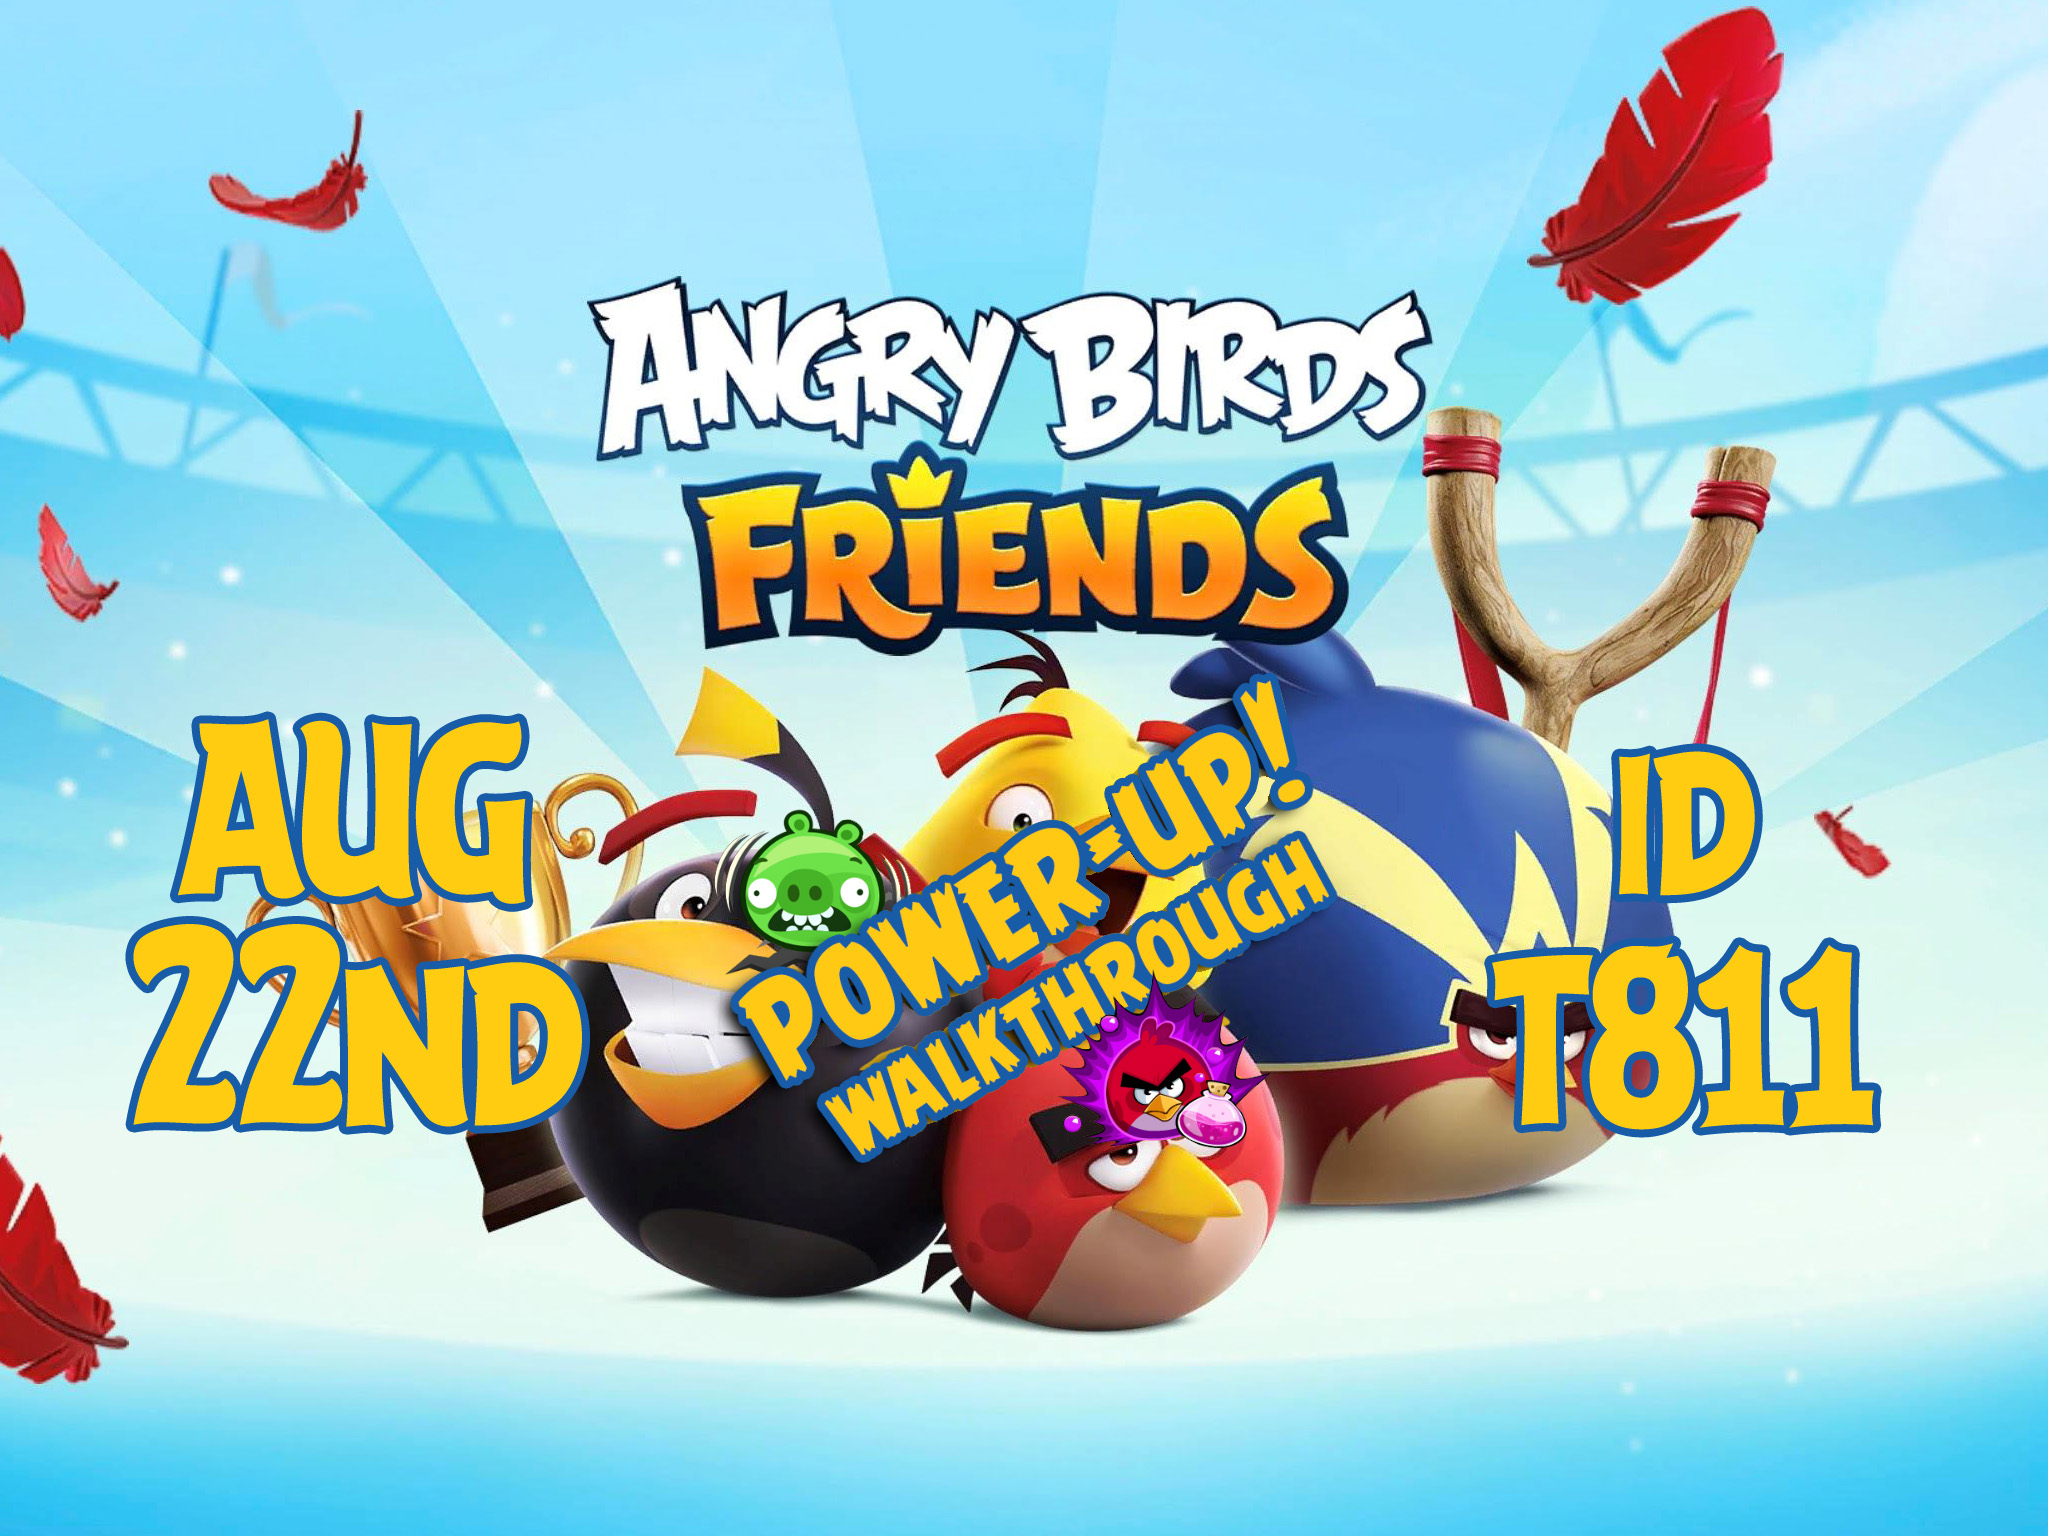 Angry-Birds-Friends-Tournament-T811a-Feature-Image-PU